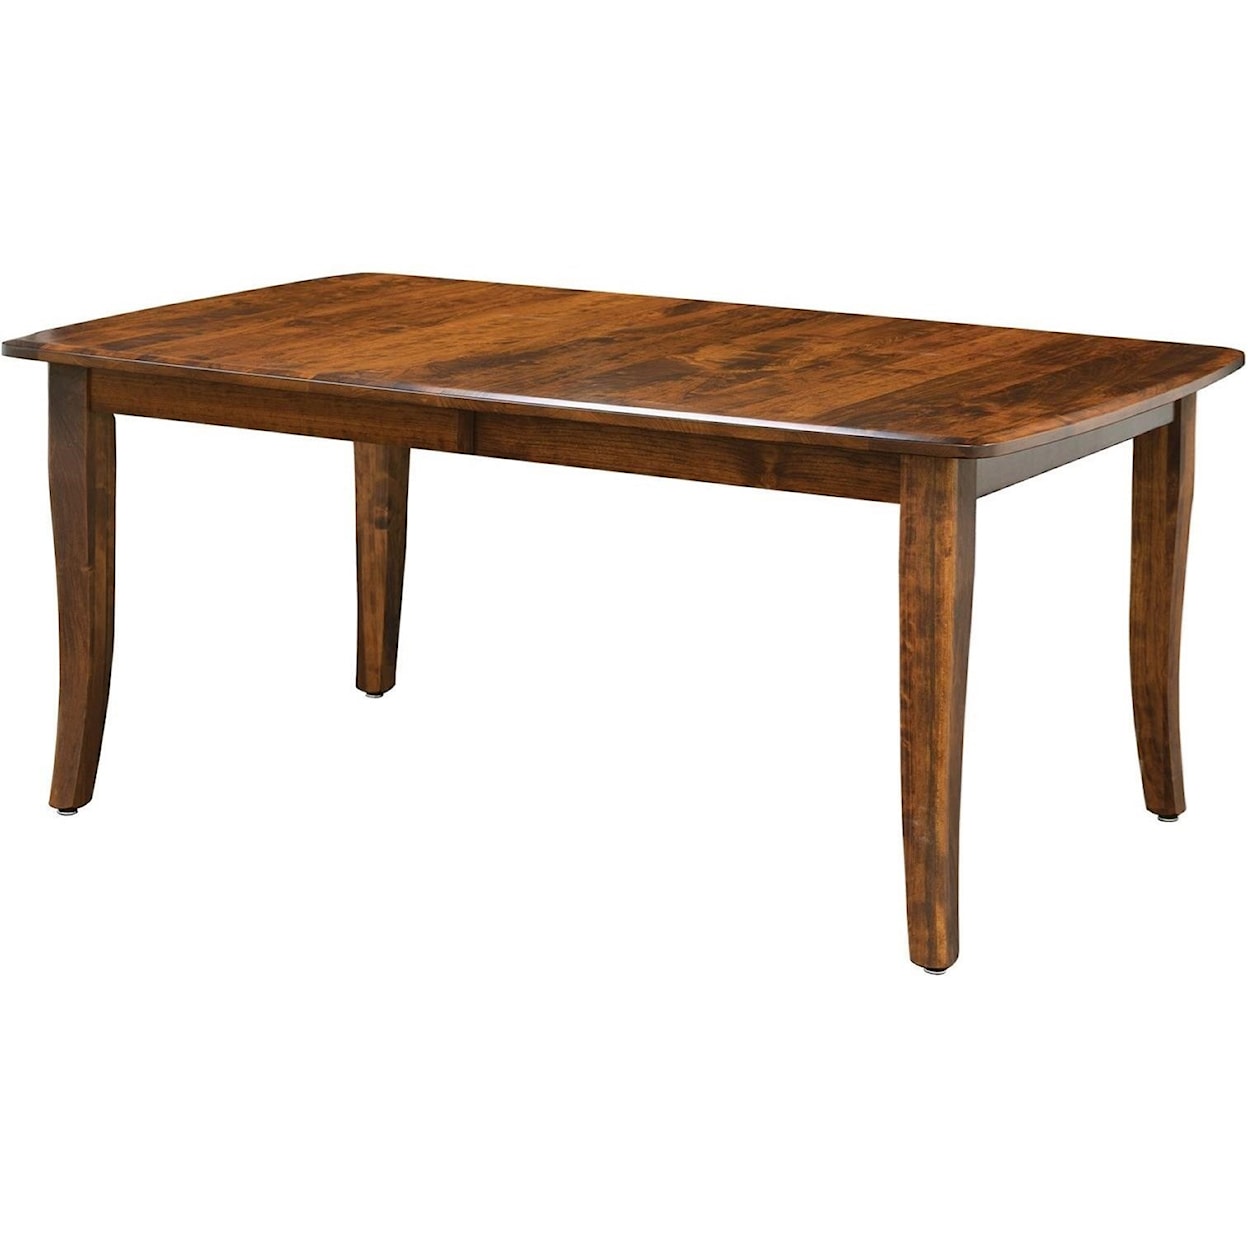 Trailway Amish Wood Easton Pike 42" x 66" Dining Table